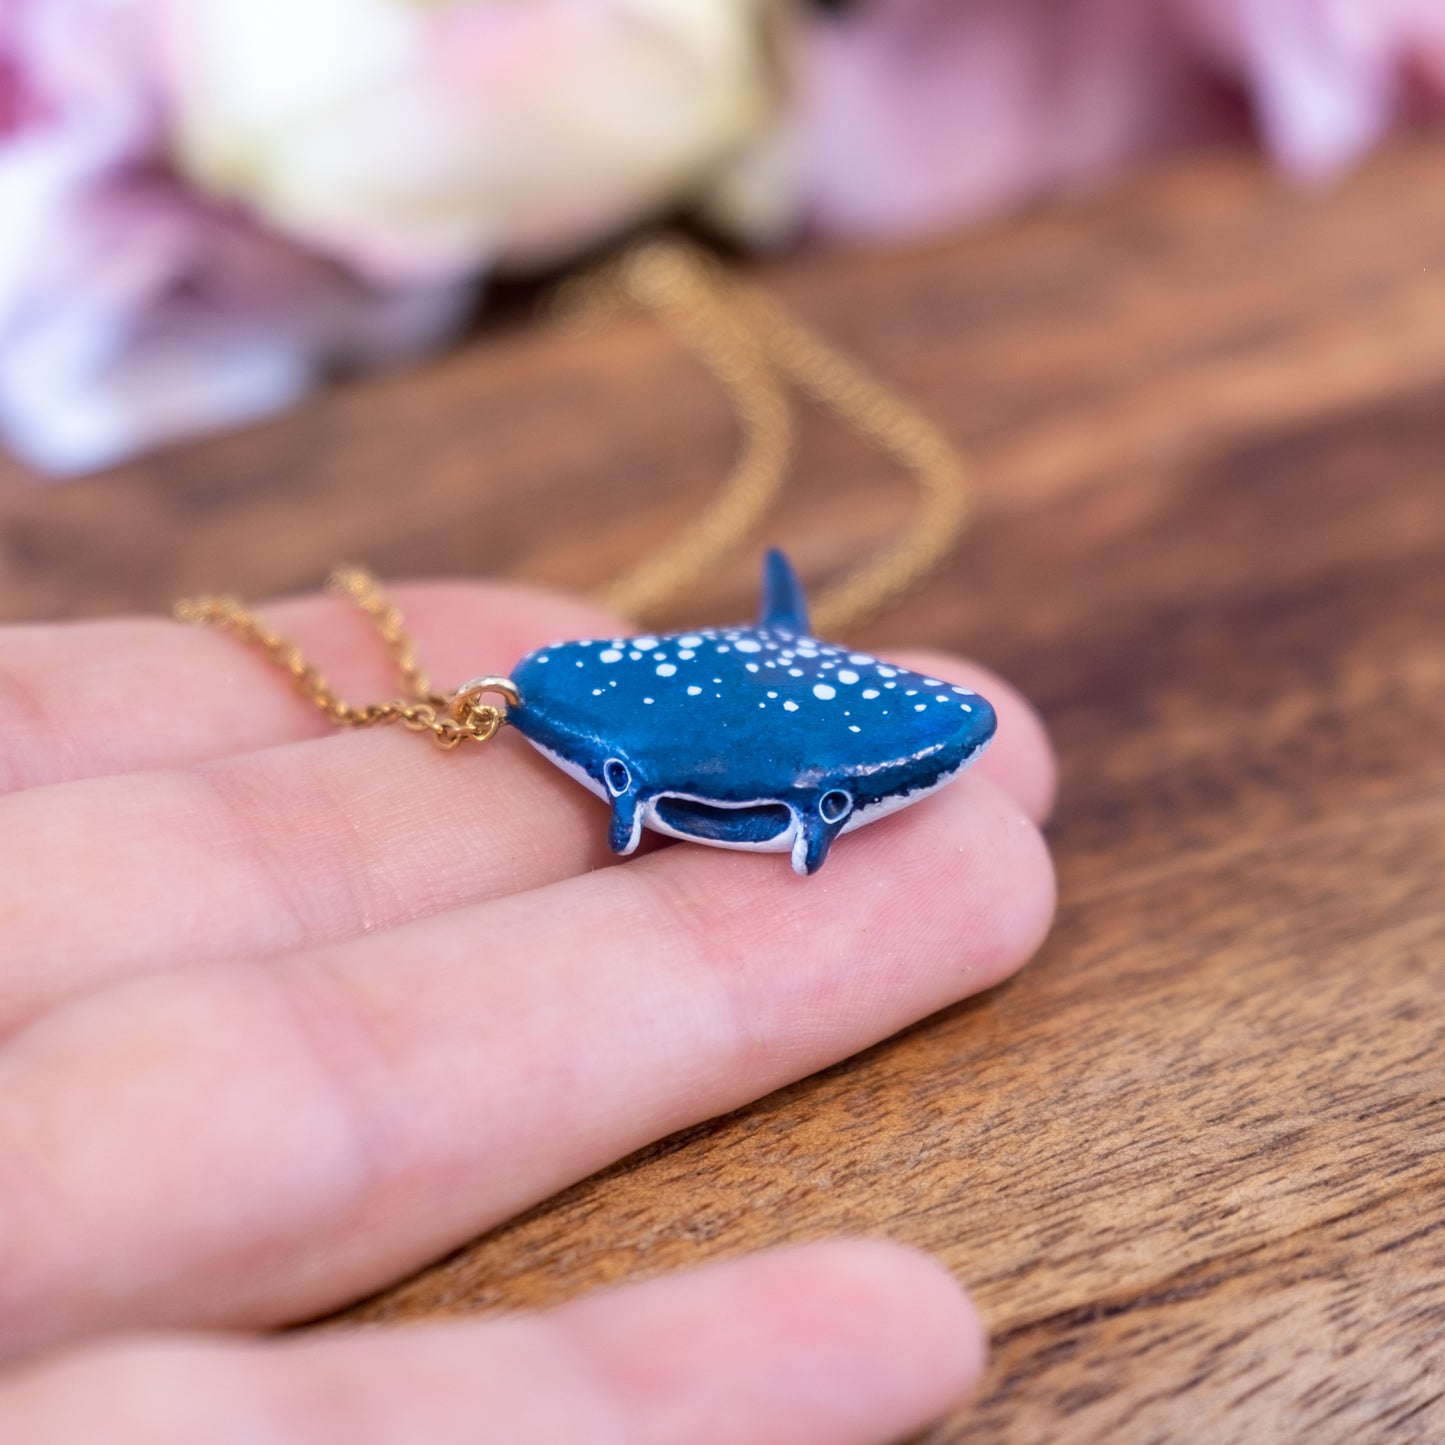 Manta Ray Necklace in Polymer Clay